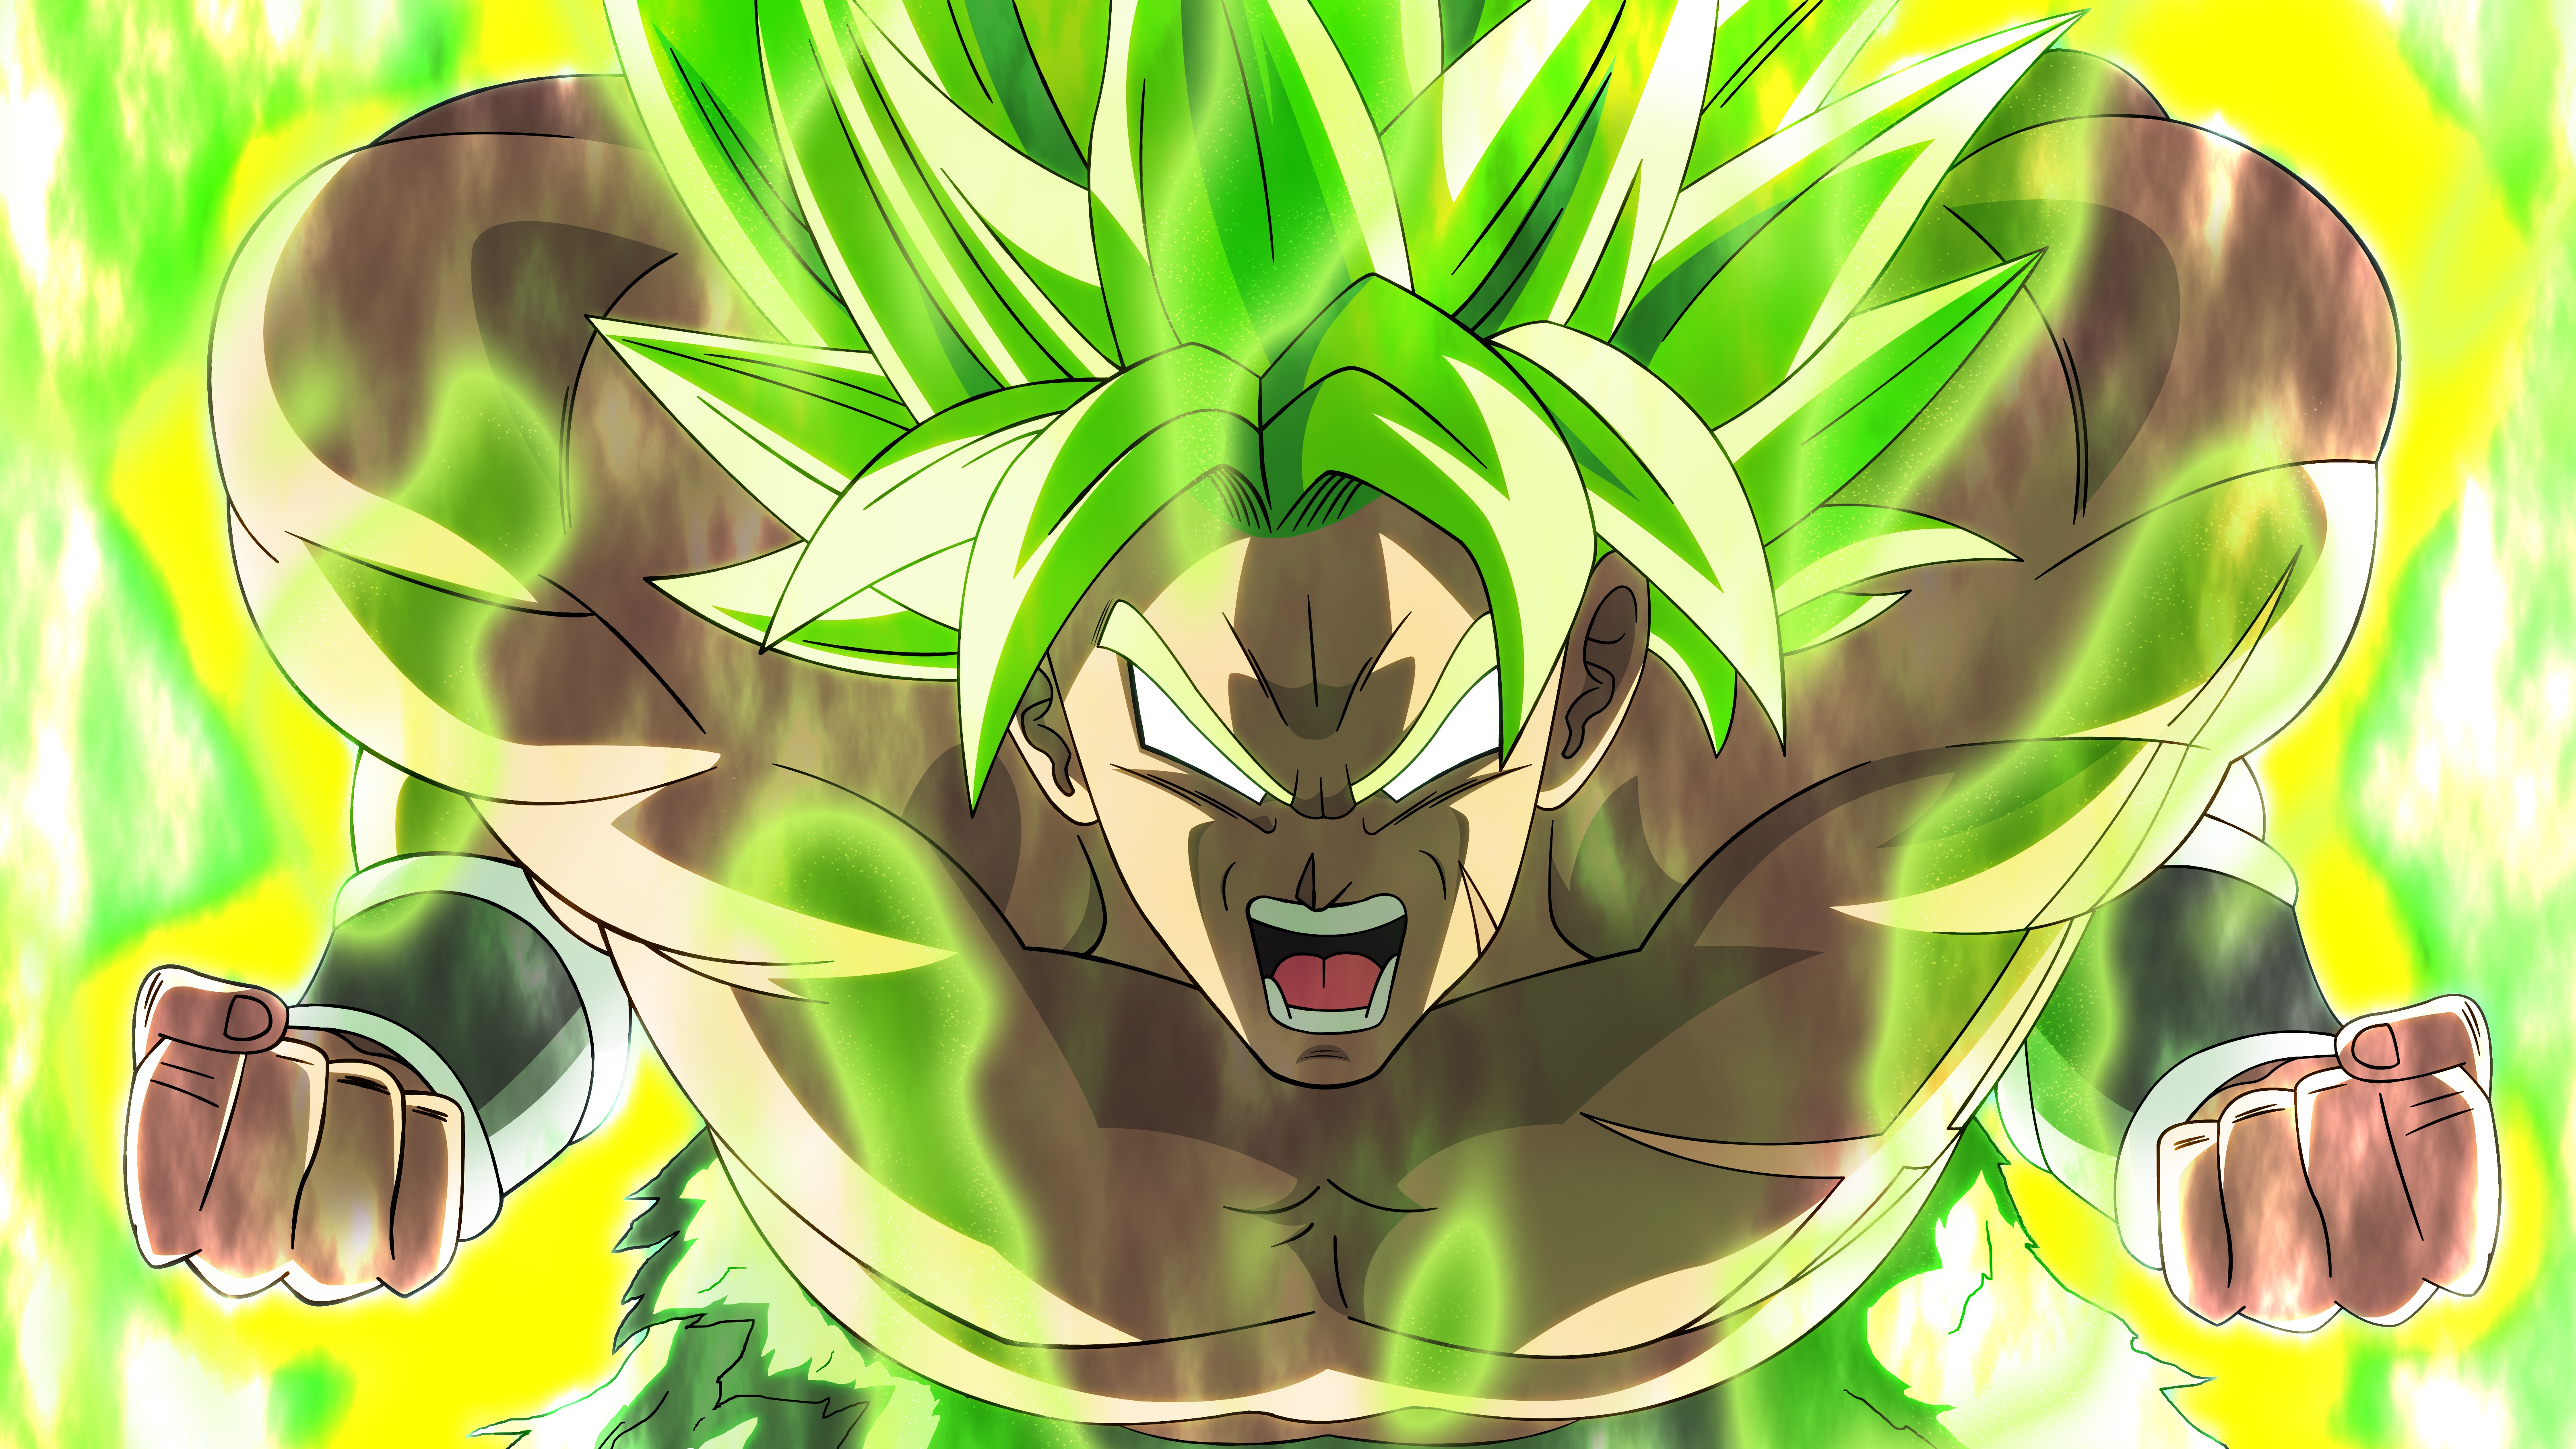 4K Dragon Ball Super: Broly Wallpaper and Background Image